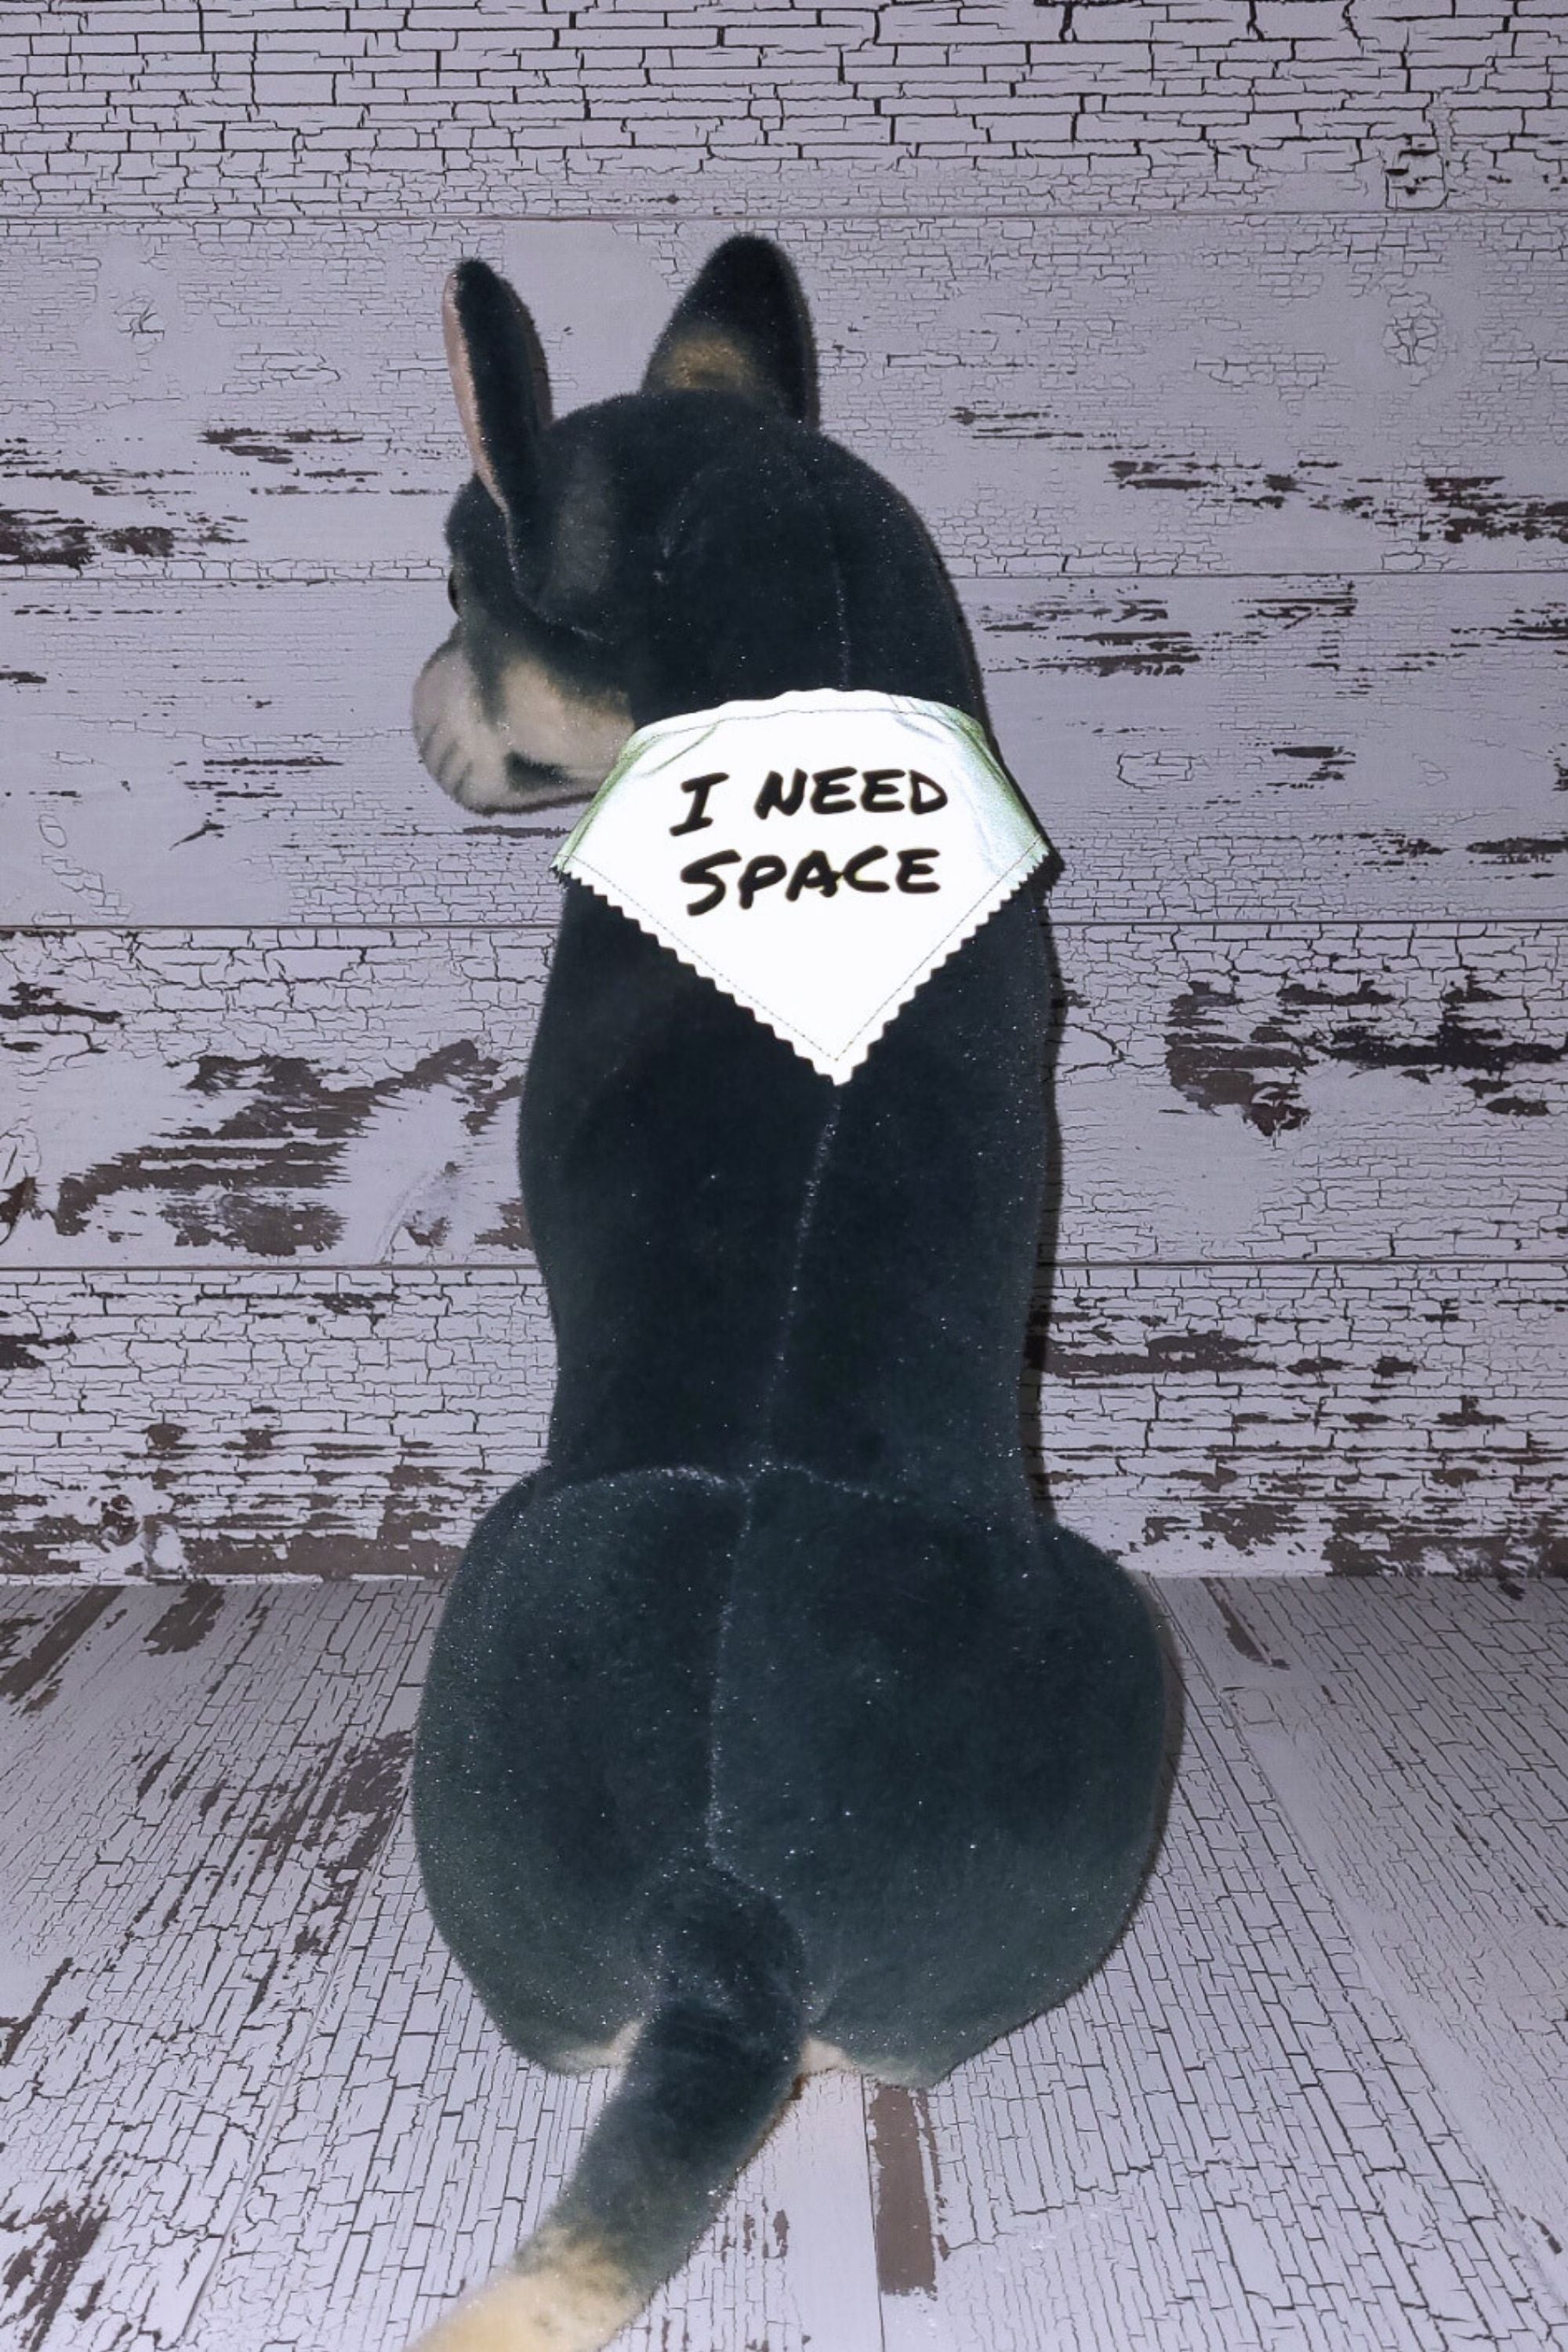 Image shows the reflective nature of the bandana, image is a black and brown dog mannequin with a neon yellow bandana that has text saying I need space.